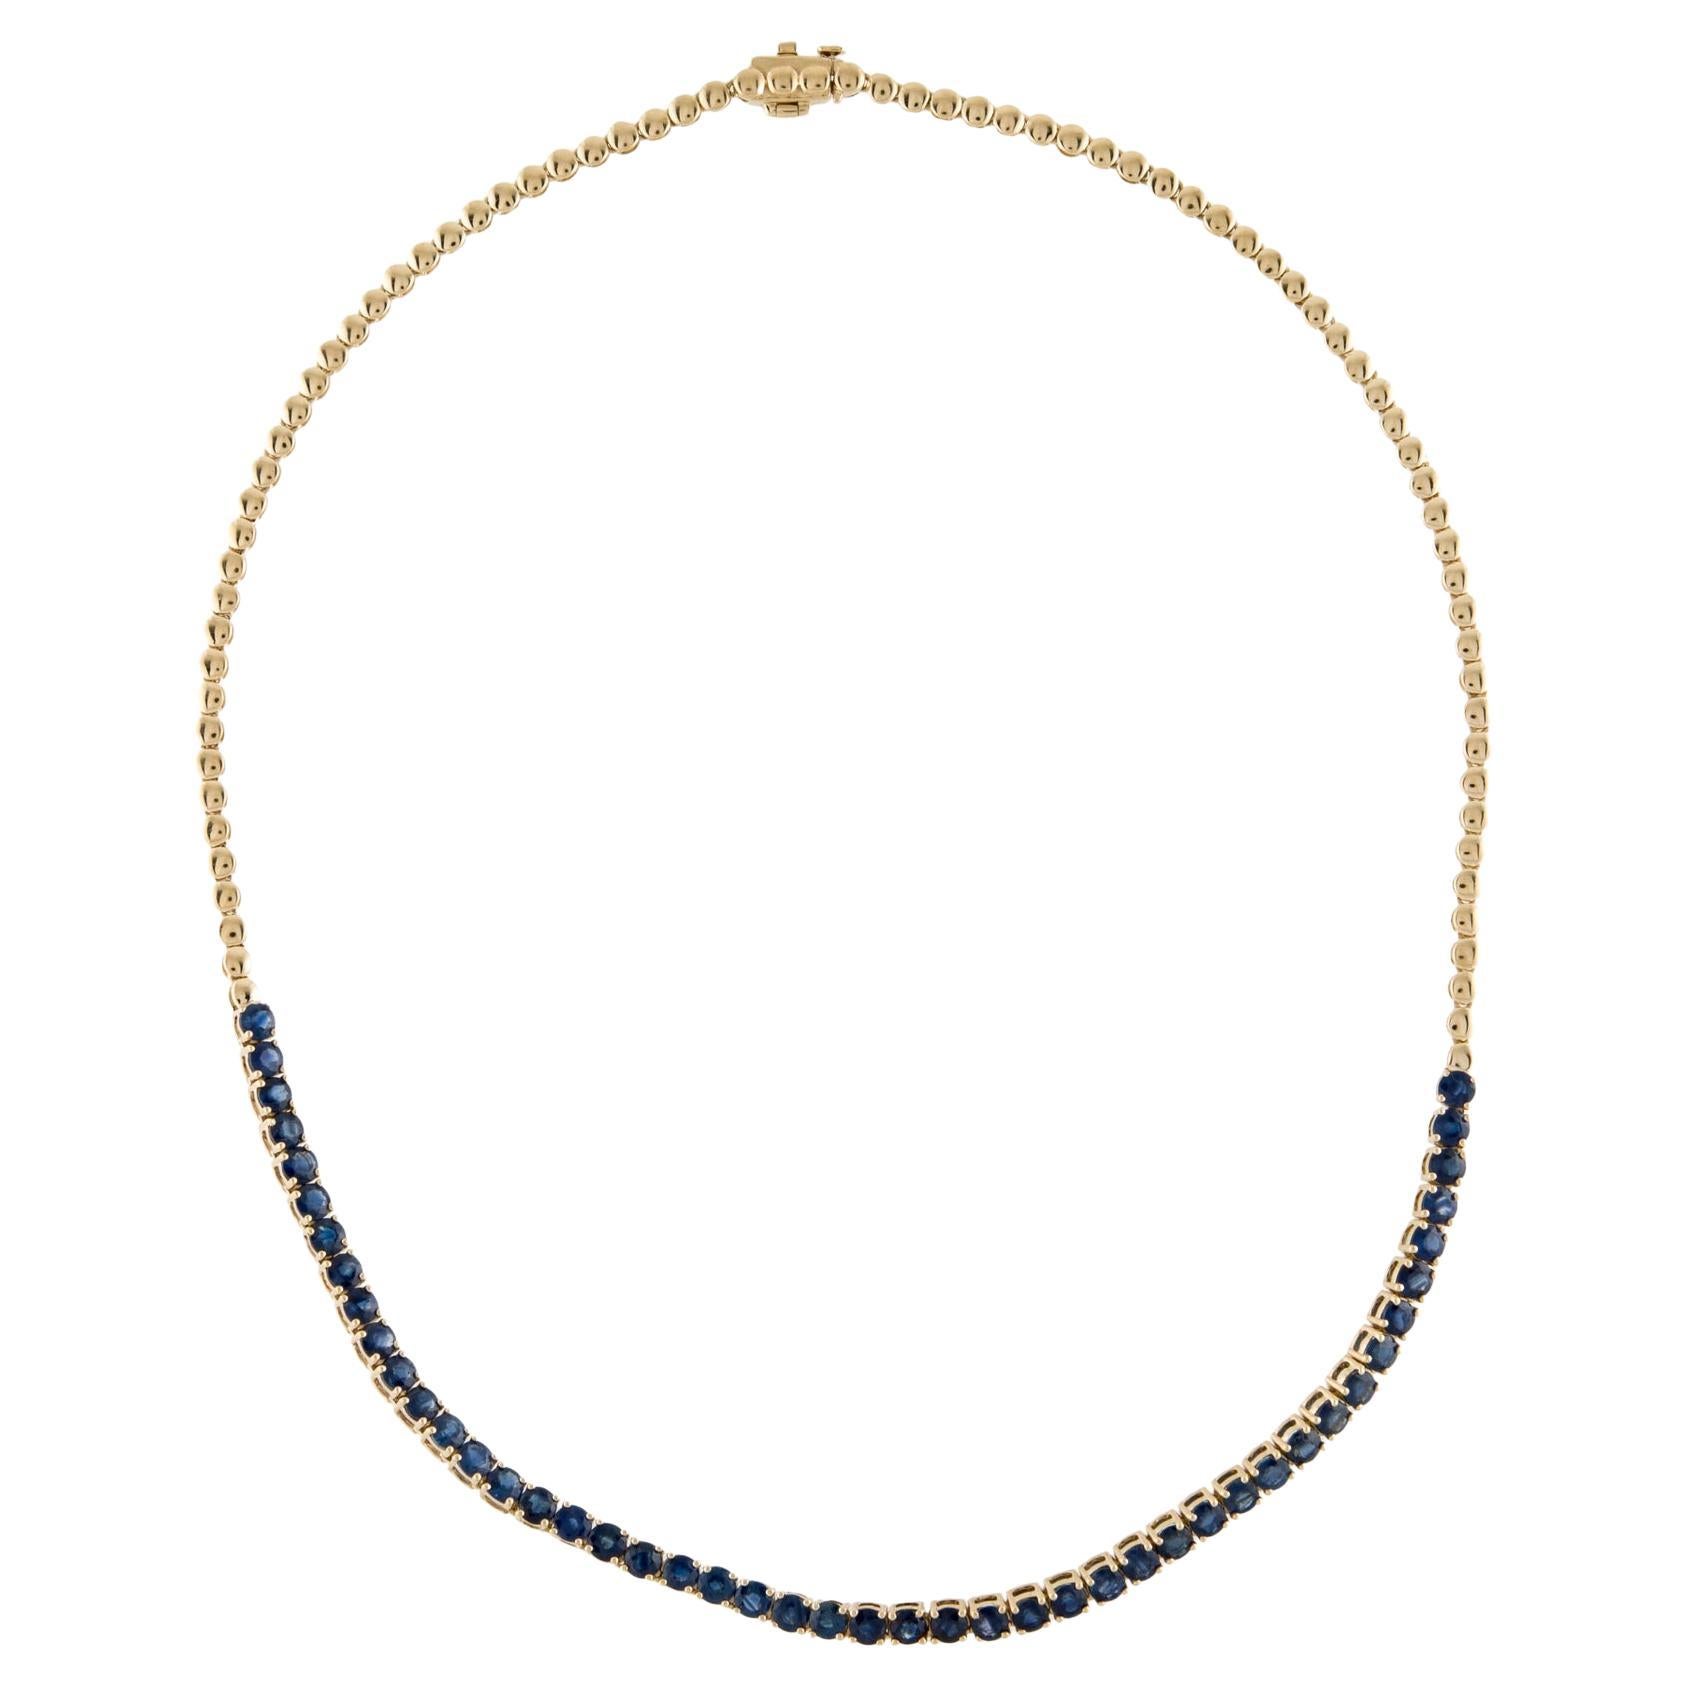 14K Sapphire Collar Necklace 10.71ctw - Exquisite Statement Jewelry for Elegance For Sale